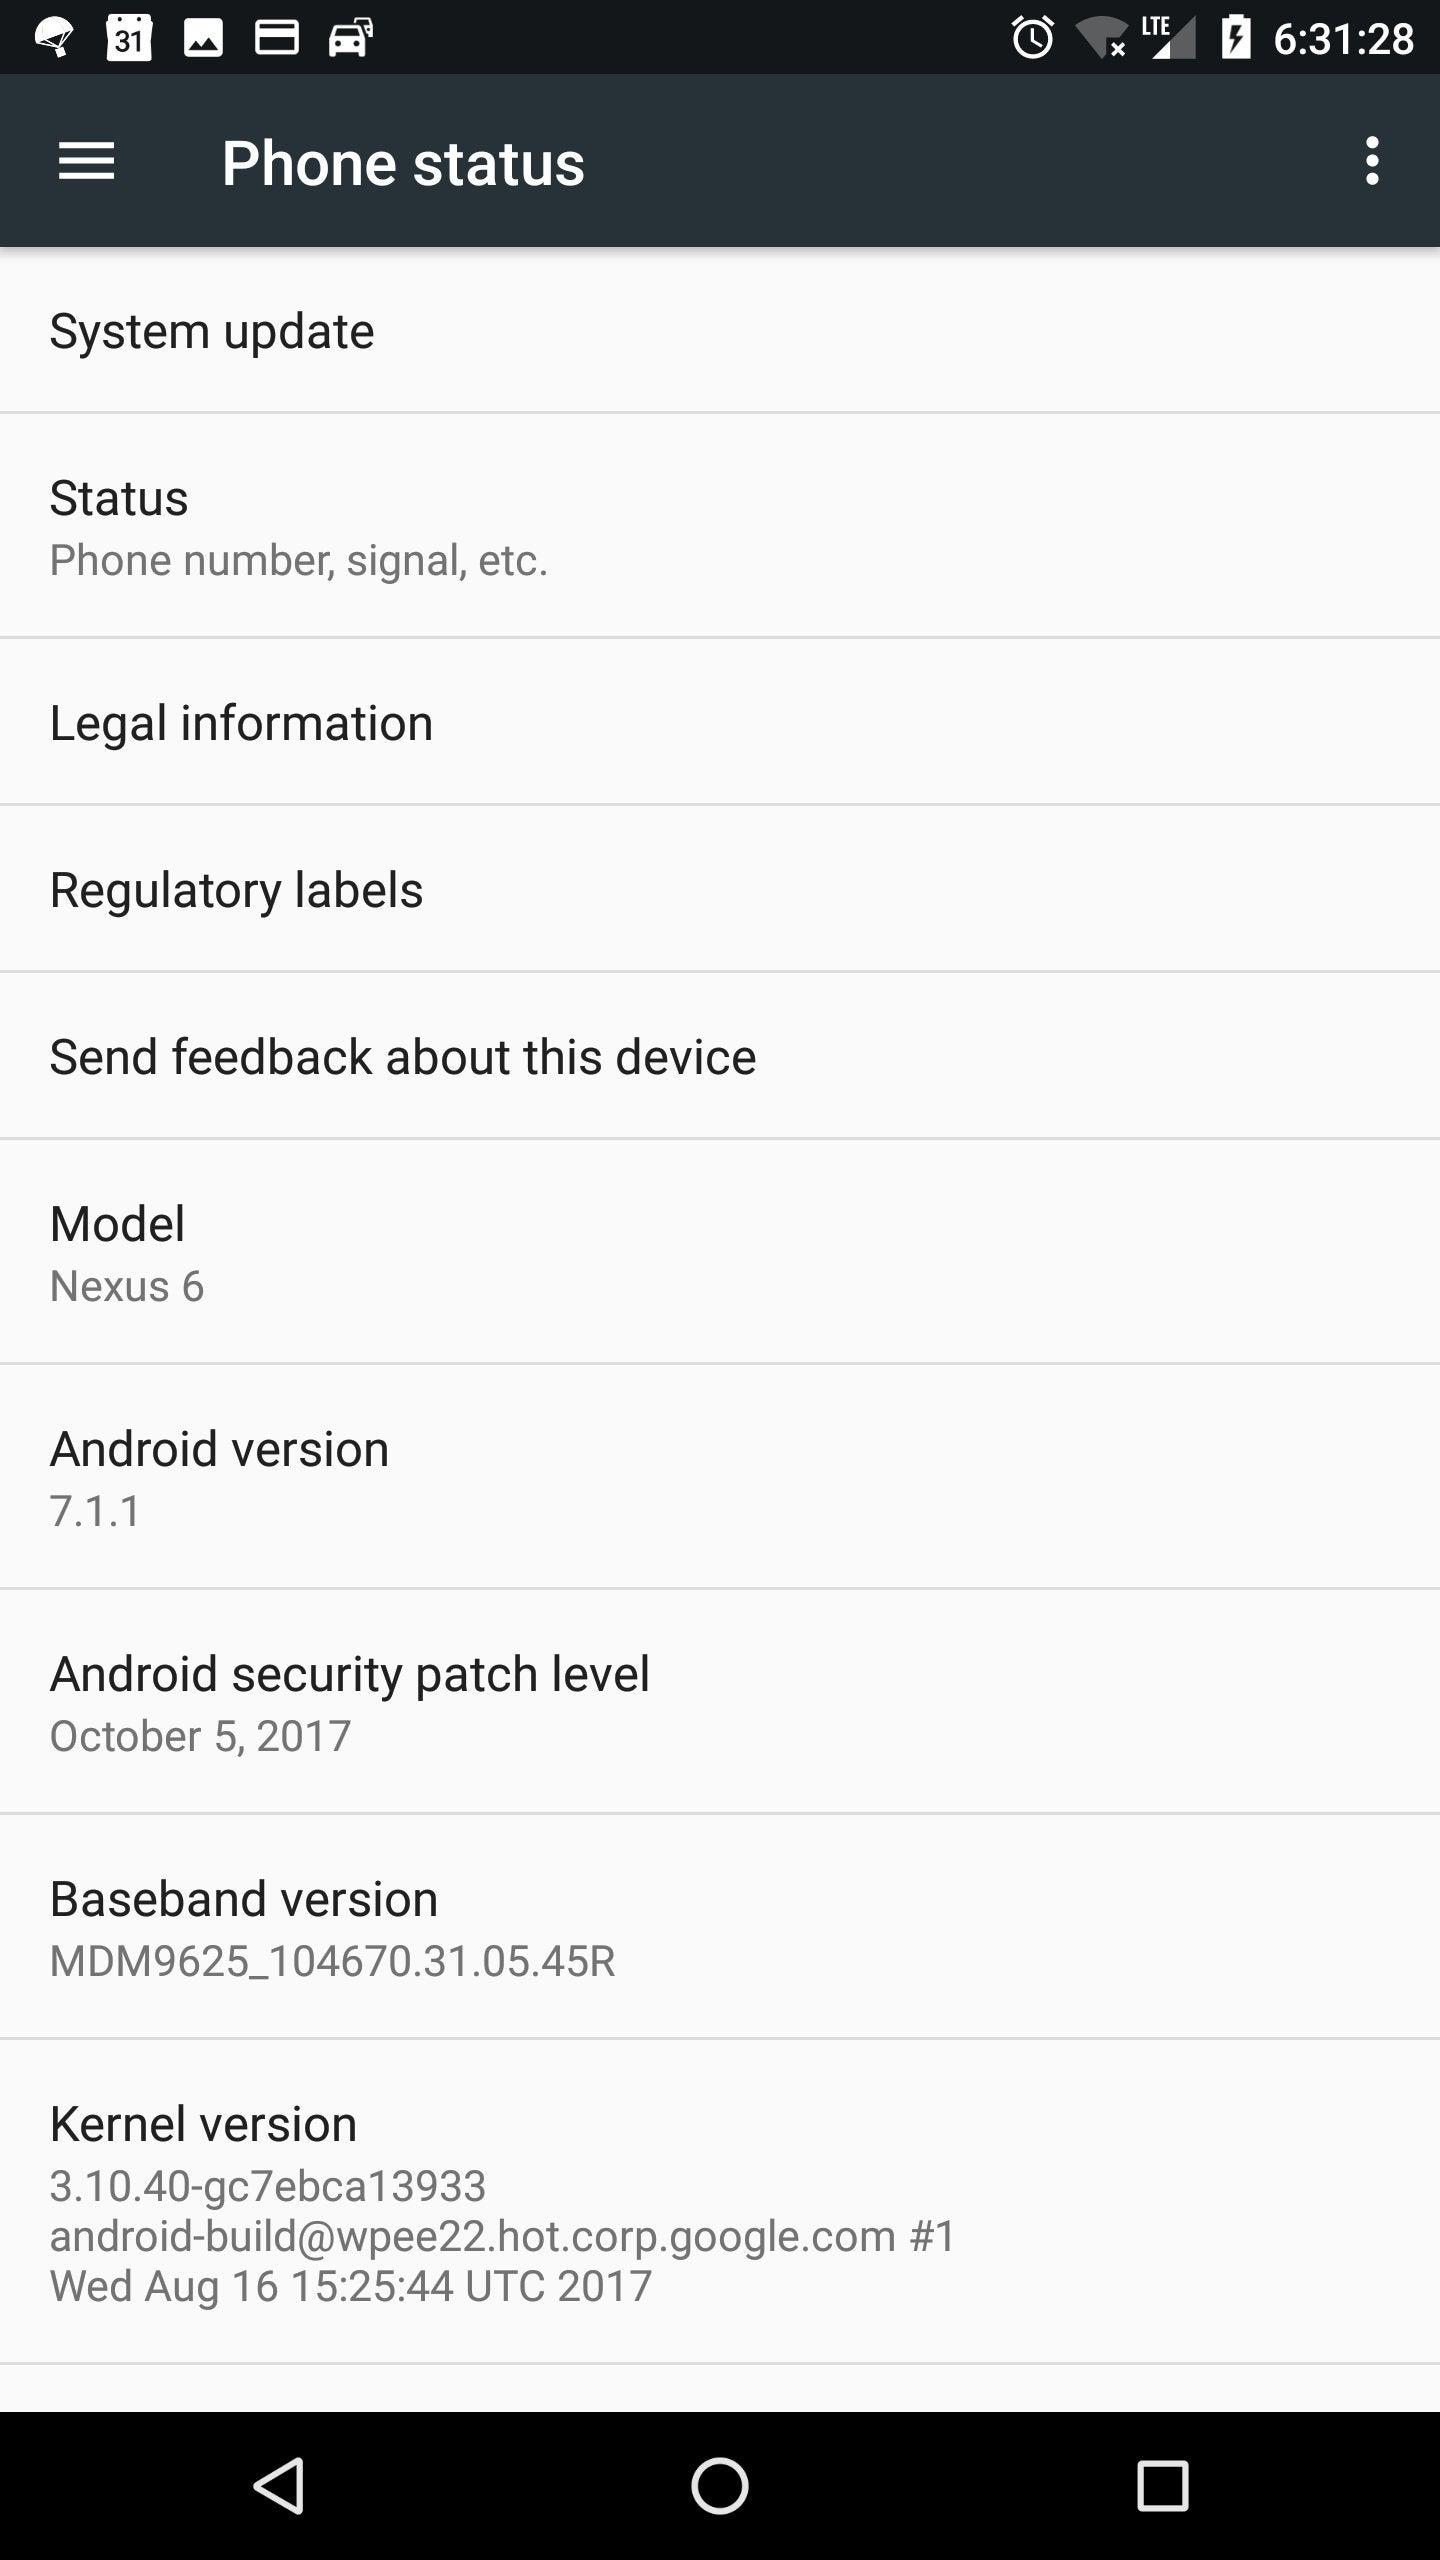 Nexus 6 receives another Android 7.1.1 Nougat update to fix a major issue